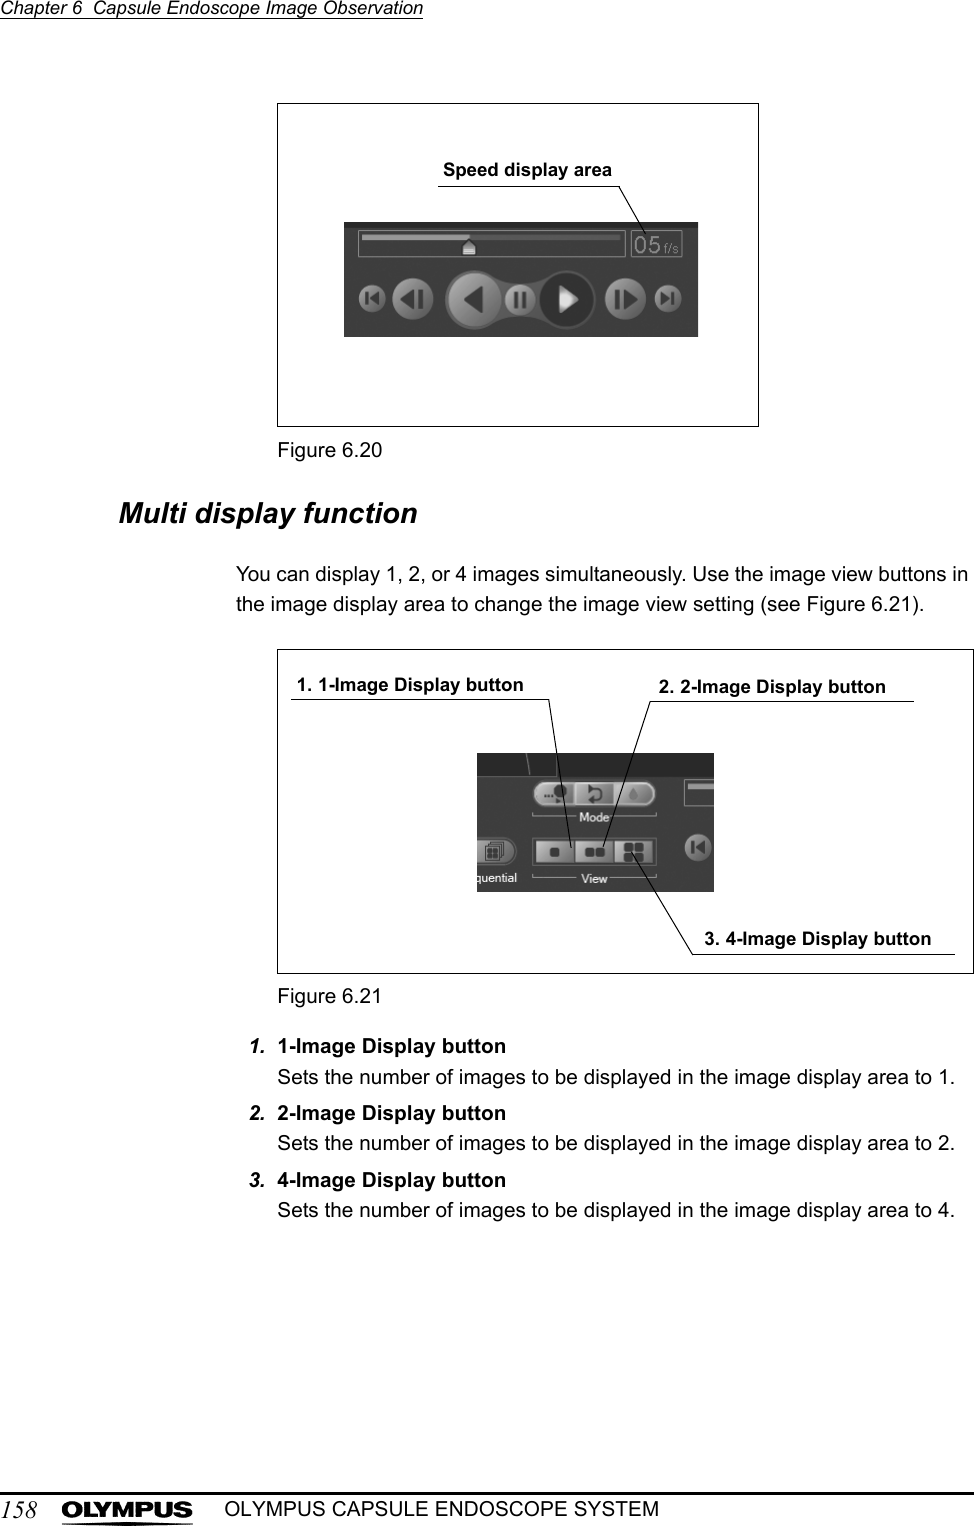 158Chapter 6  Capsule Endoscope Image ObservationOLYMPUS CAPSULE ENDOSCOPE SYSTEMFigure 6.20Multi display functionYou can display 1, 2, or 4 images simultaneously. Use the image view buttons in the image display area to change the image view setting (see Figure 6.21).Figure 6.211. 1-Image Display buttonSets the number of images to be displayed in the image display area to 1.2. 2-Image Display buttonSets the number of images to be displayed in the image display area to 2.3. 4-Image Display buttonSets the number of images to be displayed in the image display area to 4.Speed display area3. 4-Image Display button2. 2-Image Display button1. 1-Image Display button